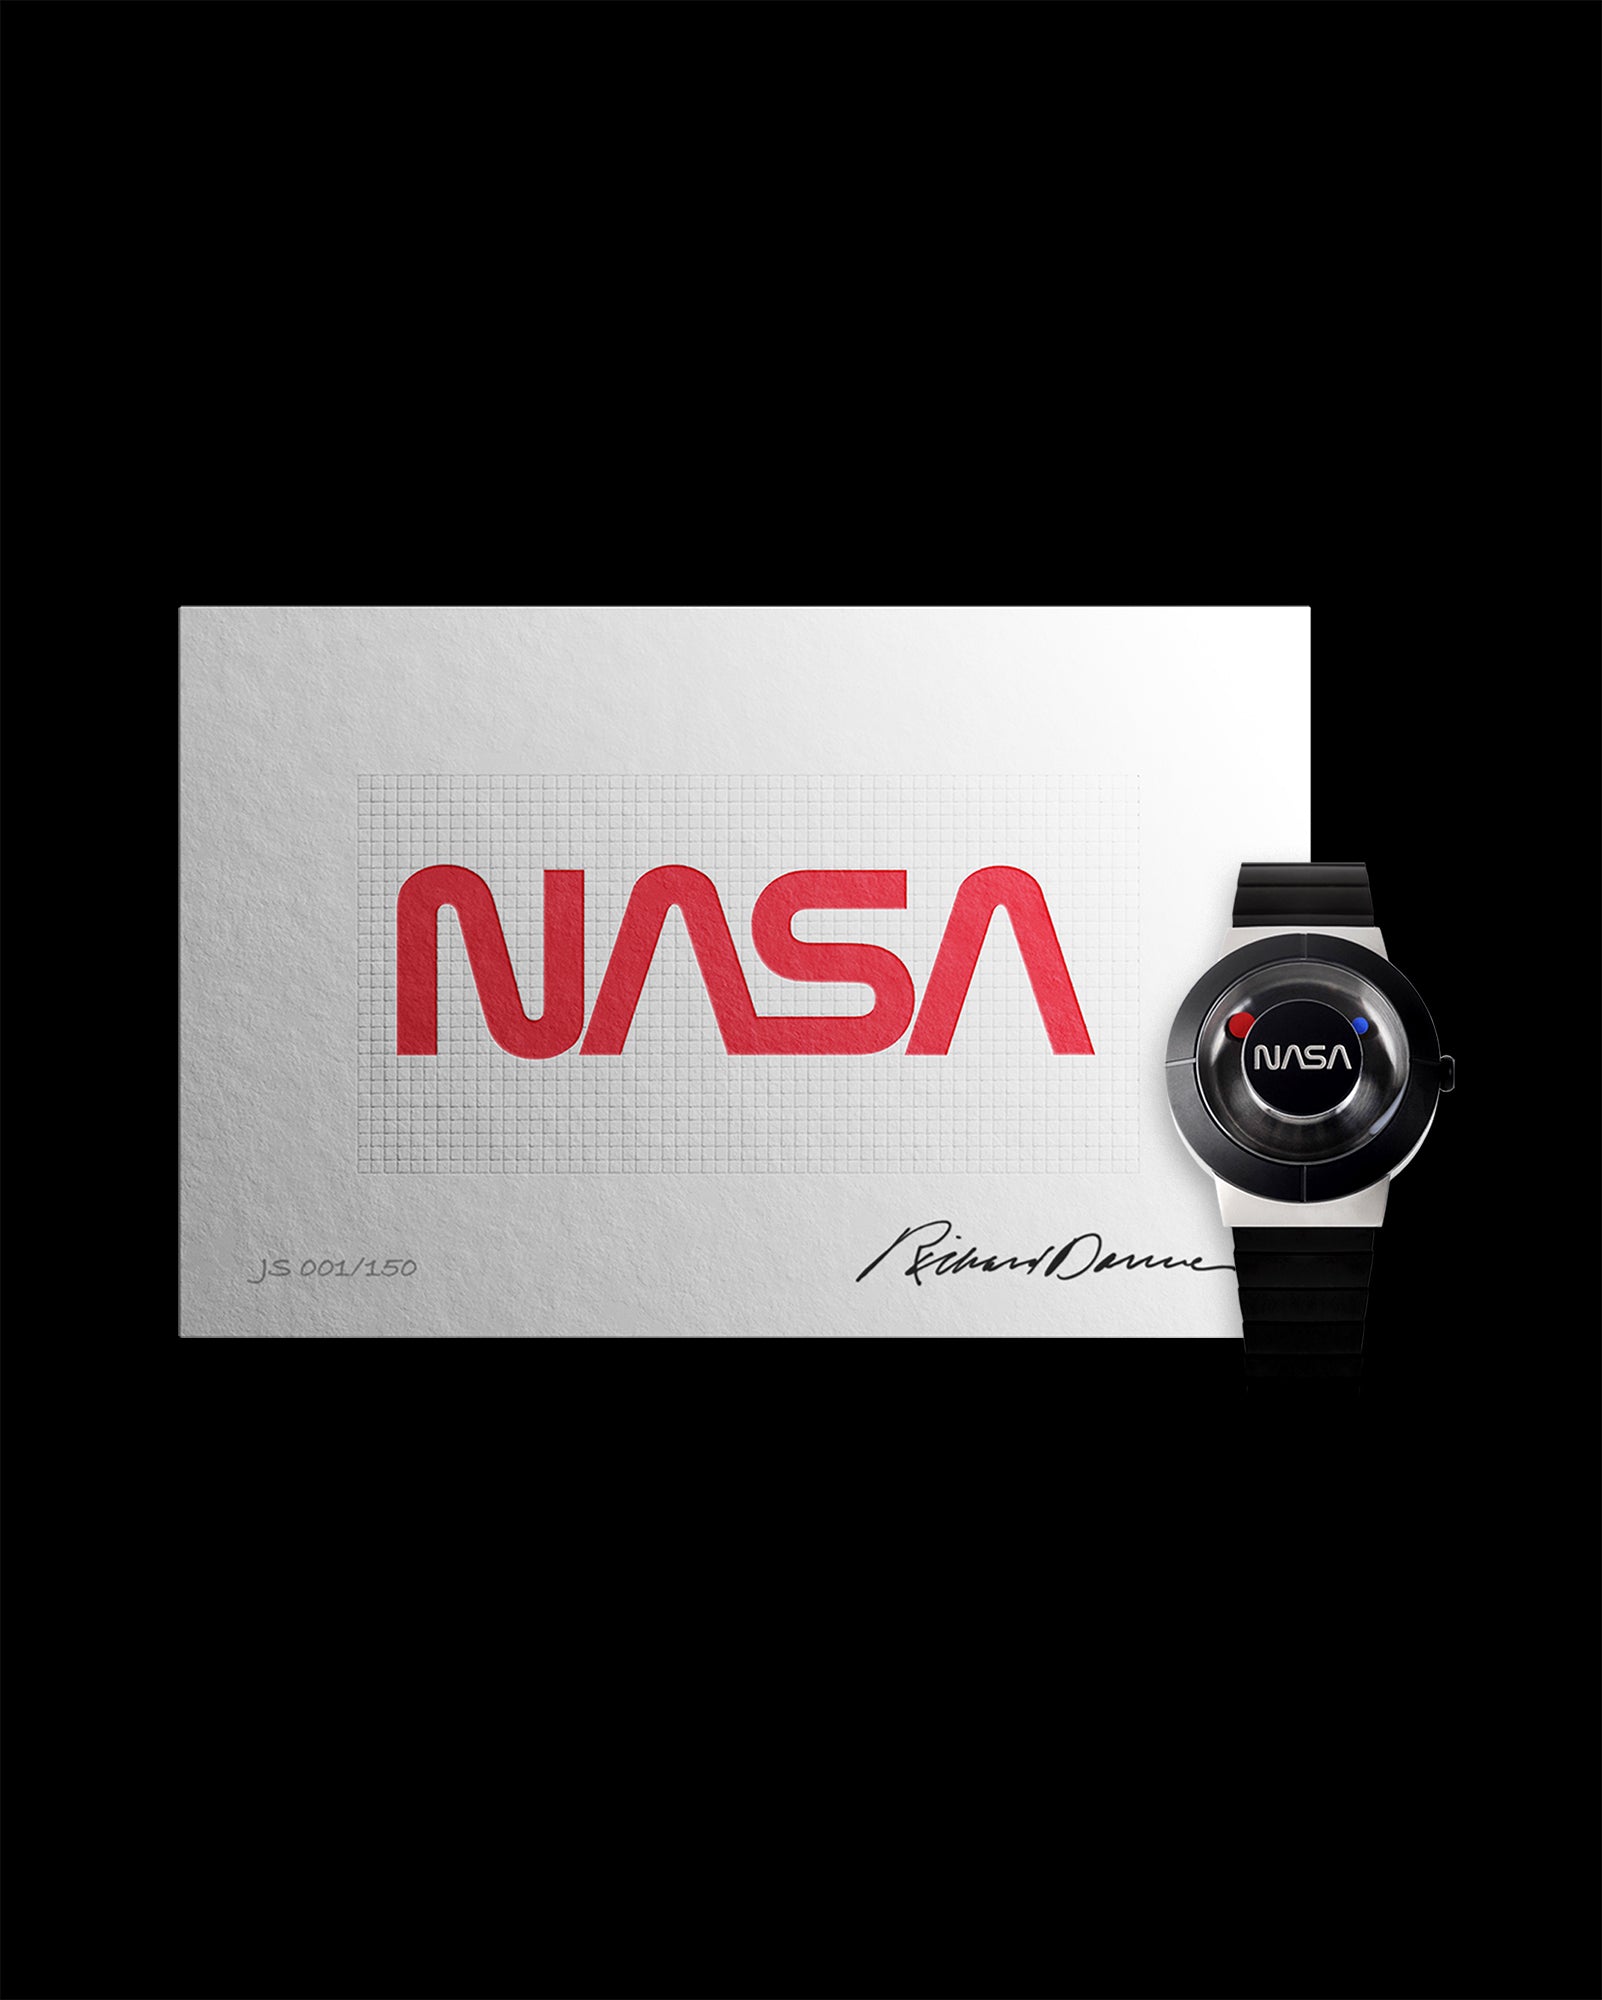 A space watch, inspired by Space itself, “Father of the NASA Design Program” Richard Danne designs his One and Only Space Watch, as homage to his long and fruitful relationship with the NASA family with a number card with NASA logo next to it